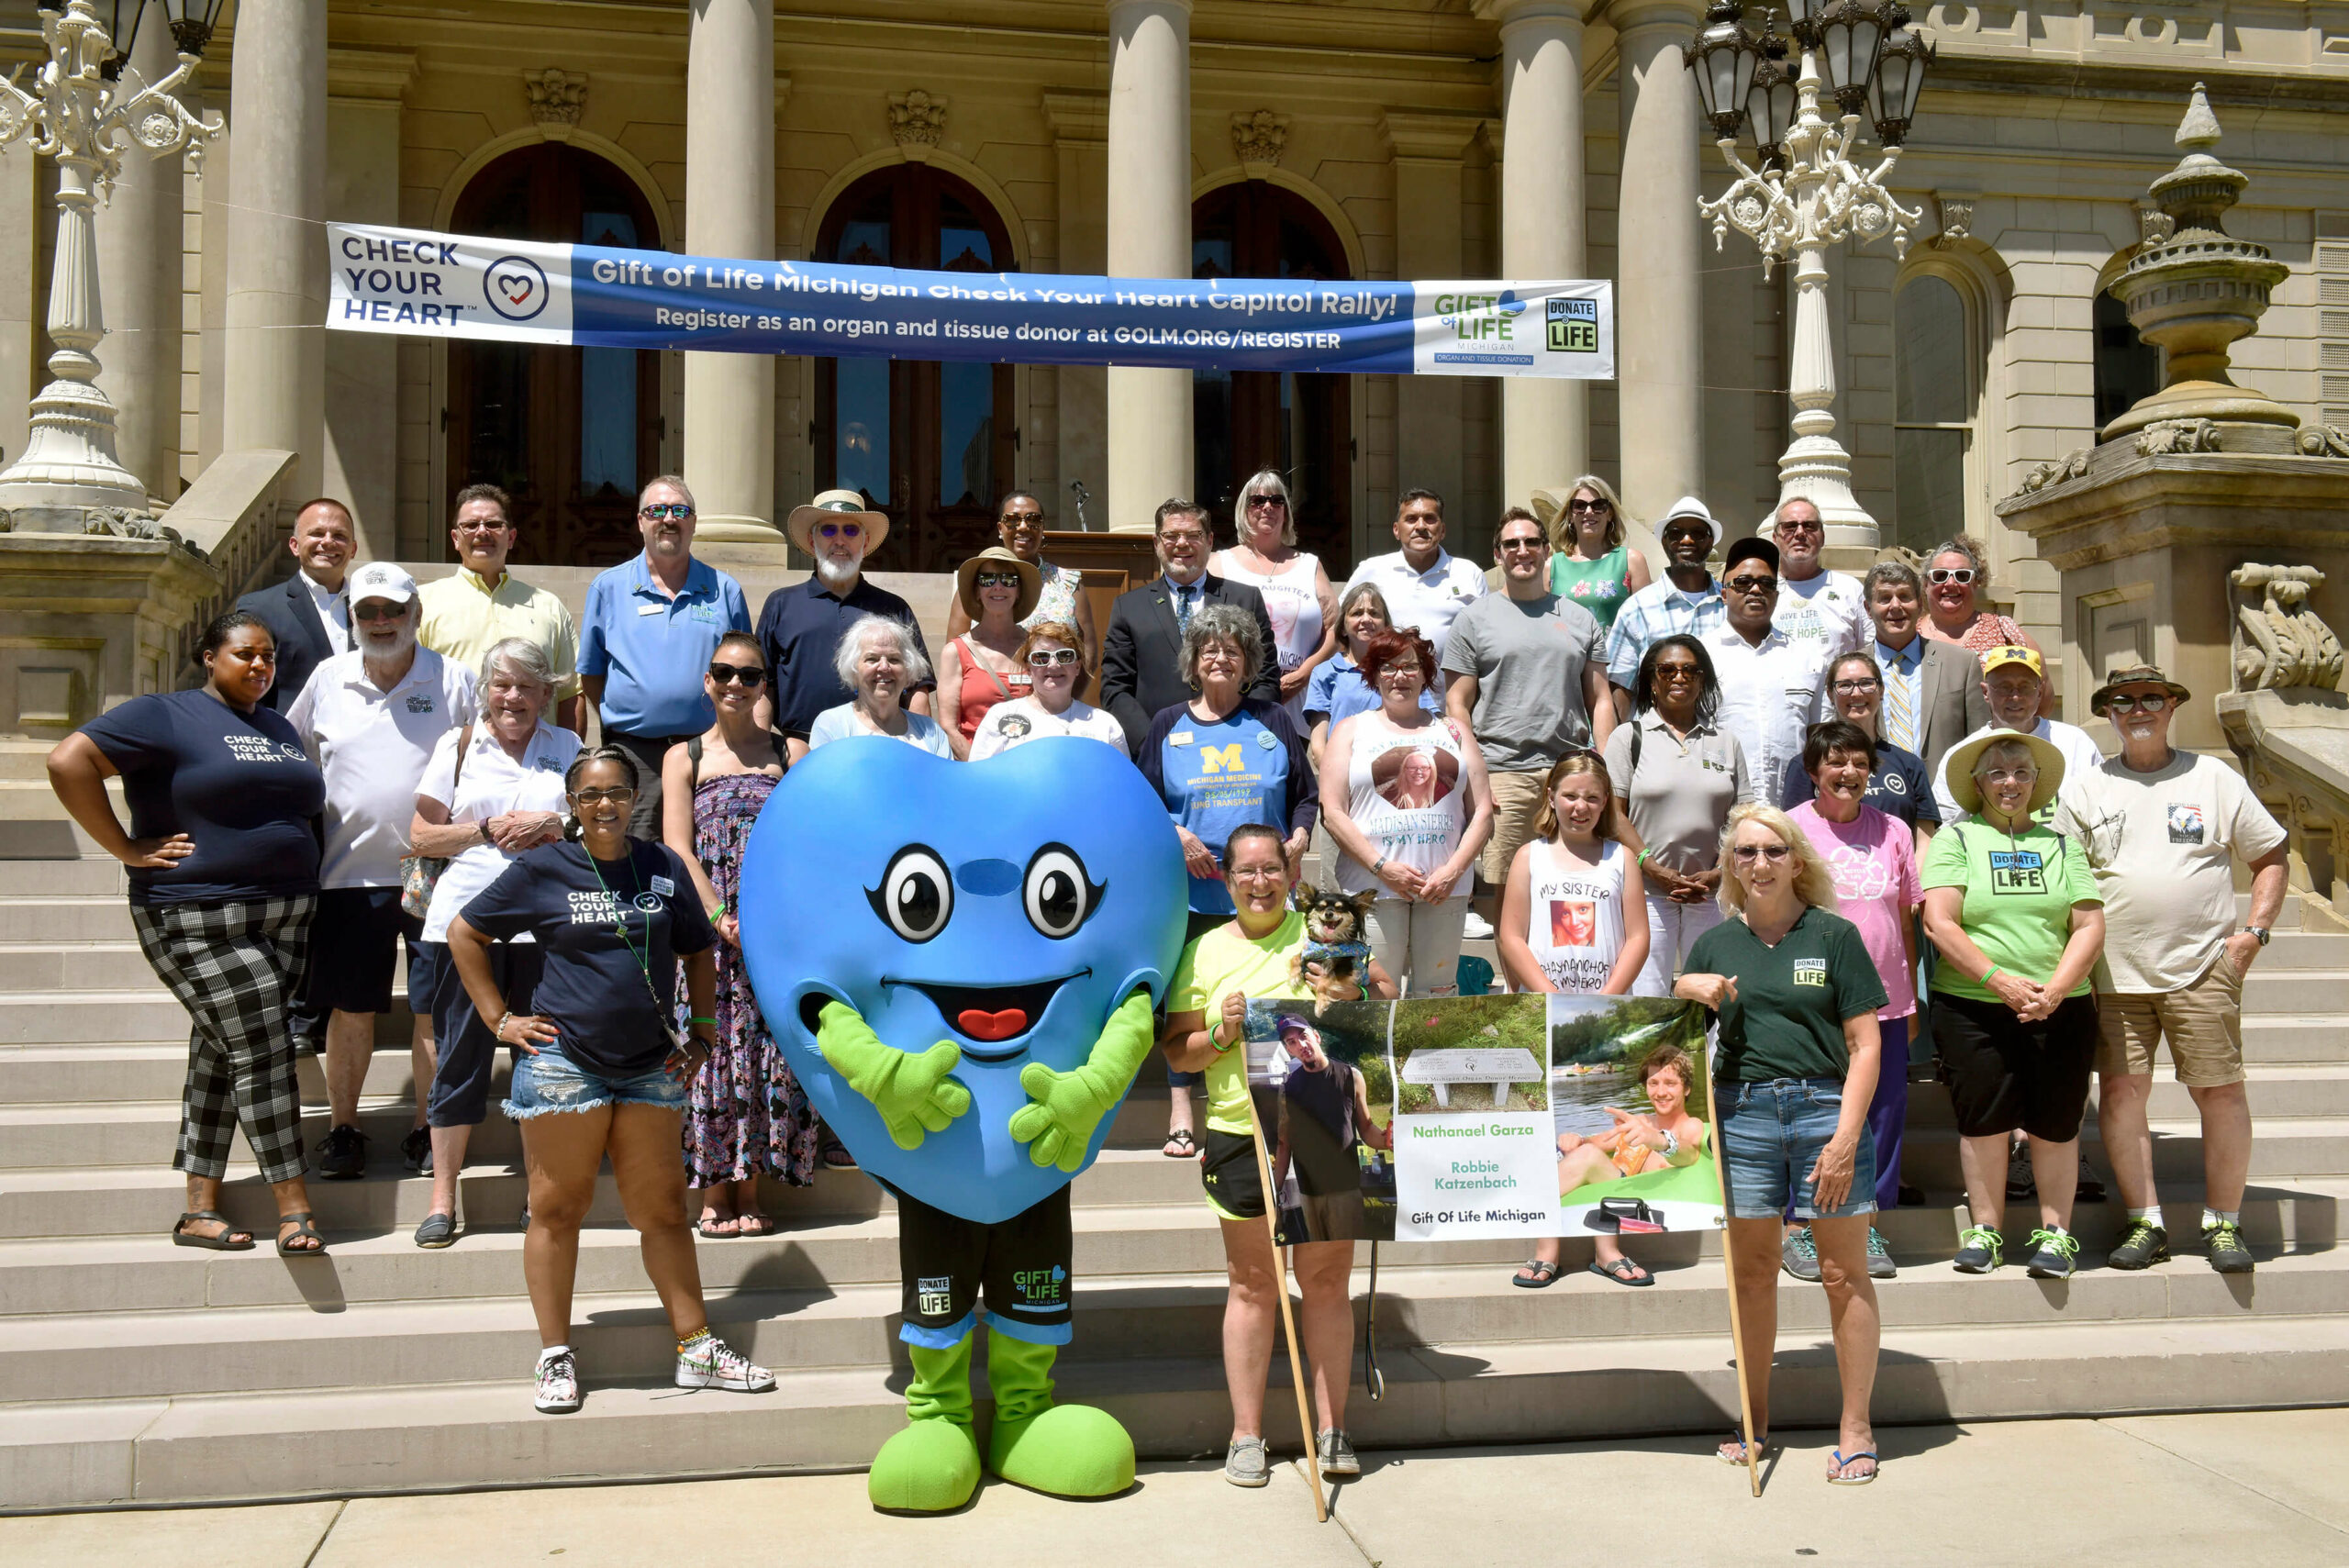 A group of organ and tissue donation supporters gathered on the Capitol steps with Hartley (blue heart mascot) under a Check Your Heart banner